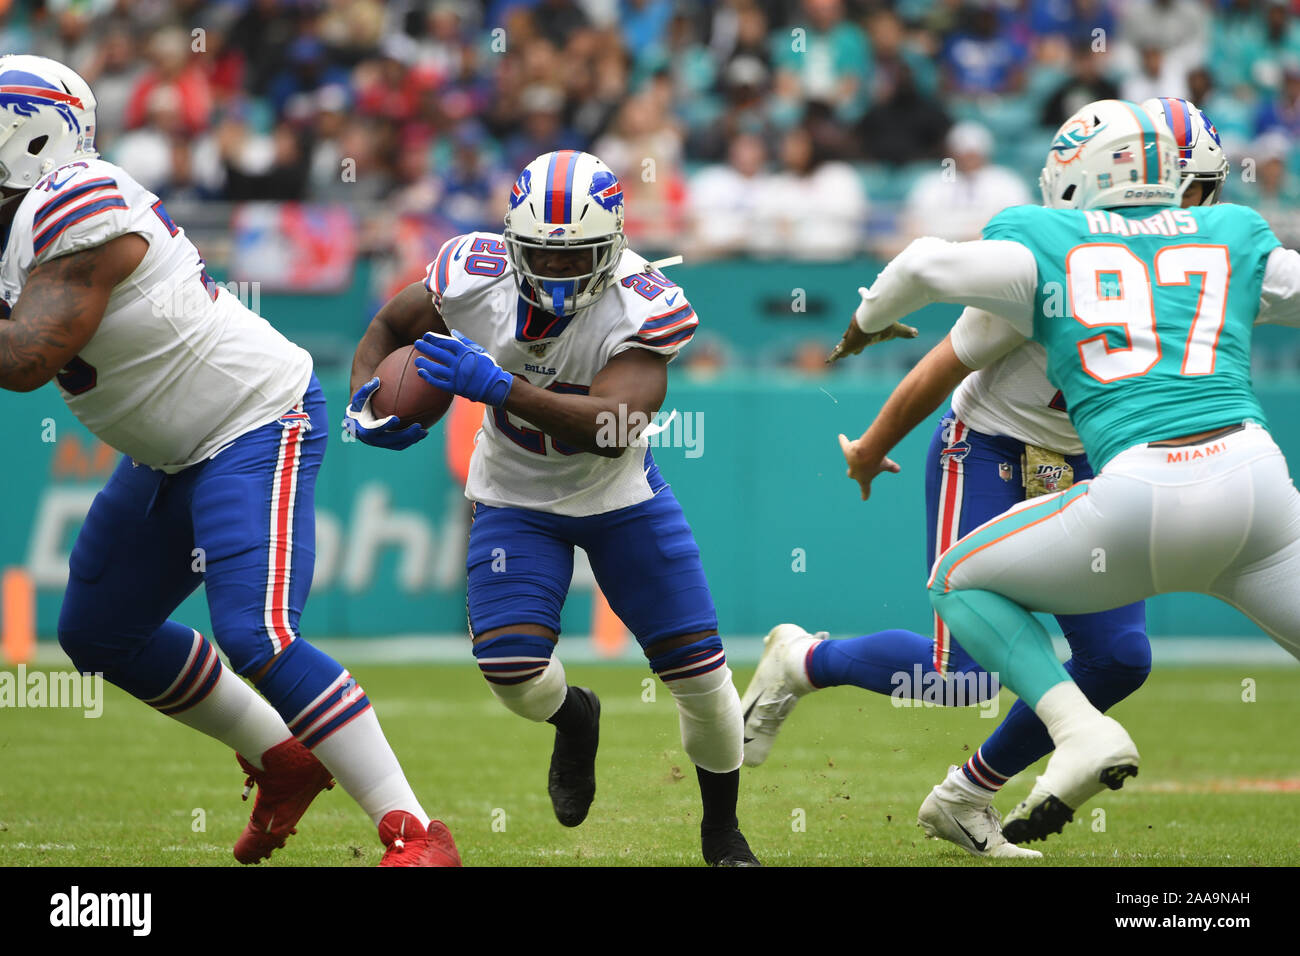 November 17, 2019: Frank Gore #20 of Buffalo in action during the NFL ...